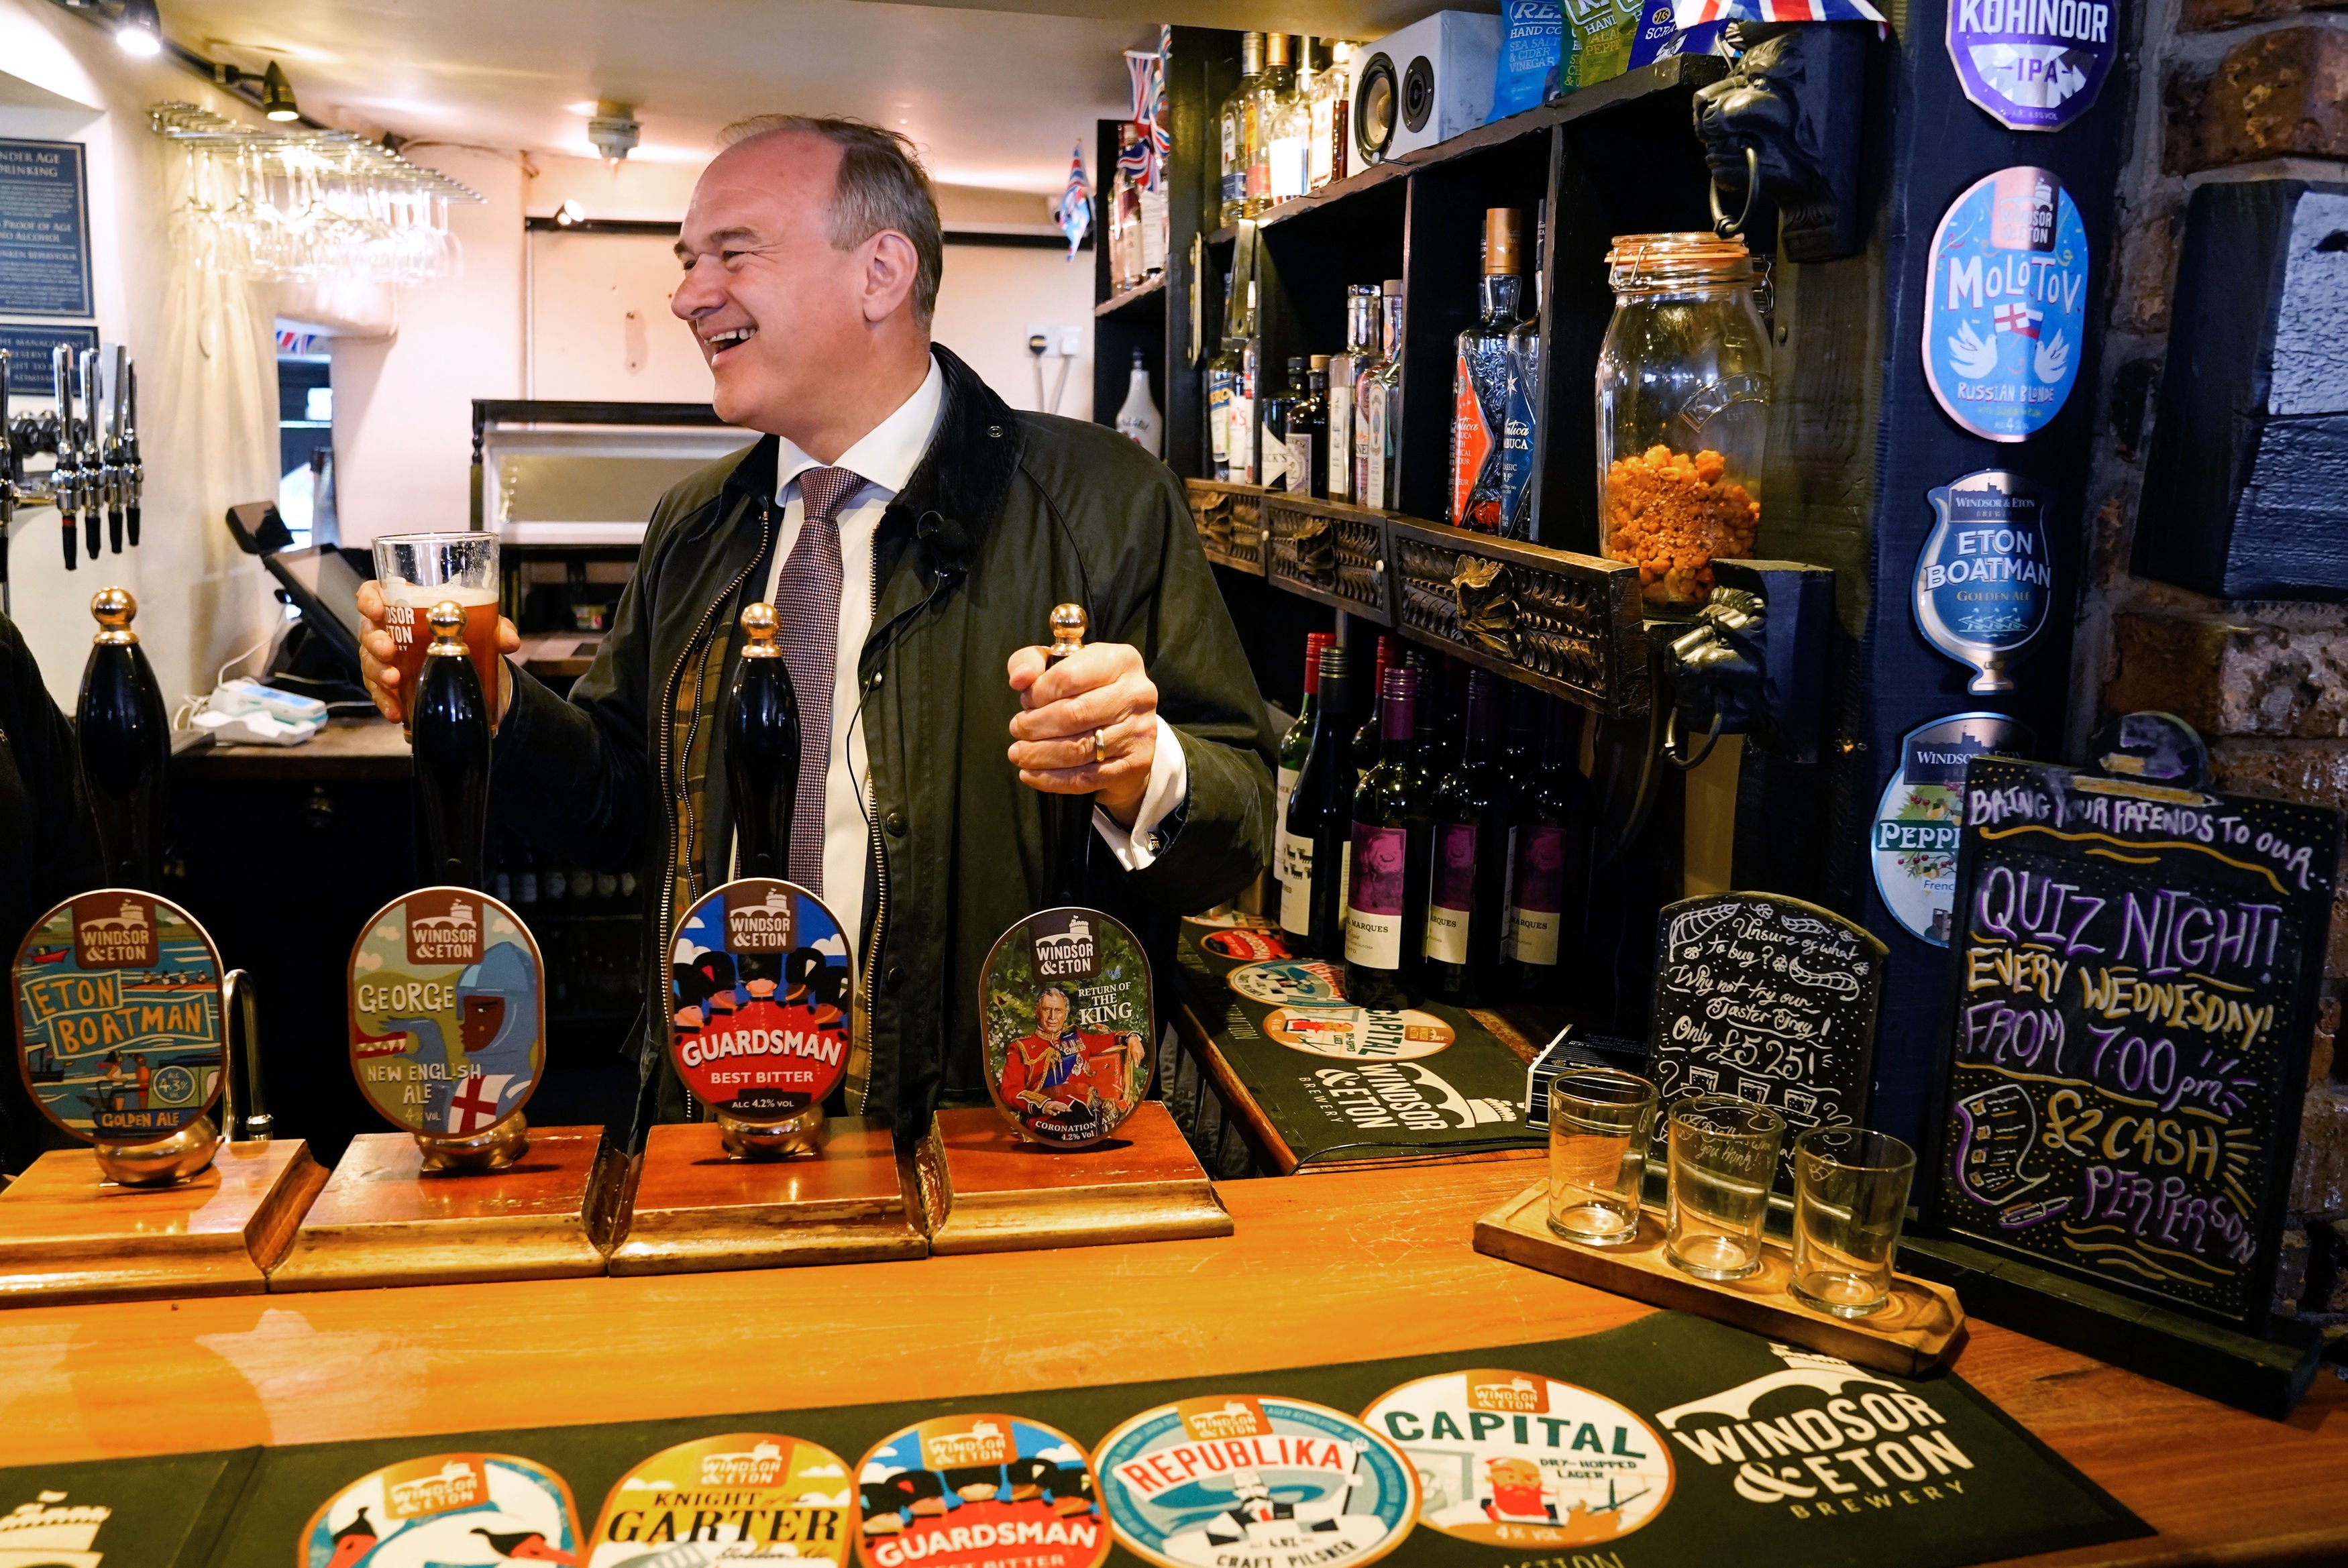 Leader of the Liberal Democrats Sir Ed Davey pulls a pint of 'Return of the King' in the George Inn pub during a visit to Windsor, Berkshire